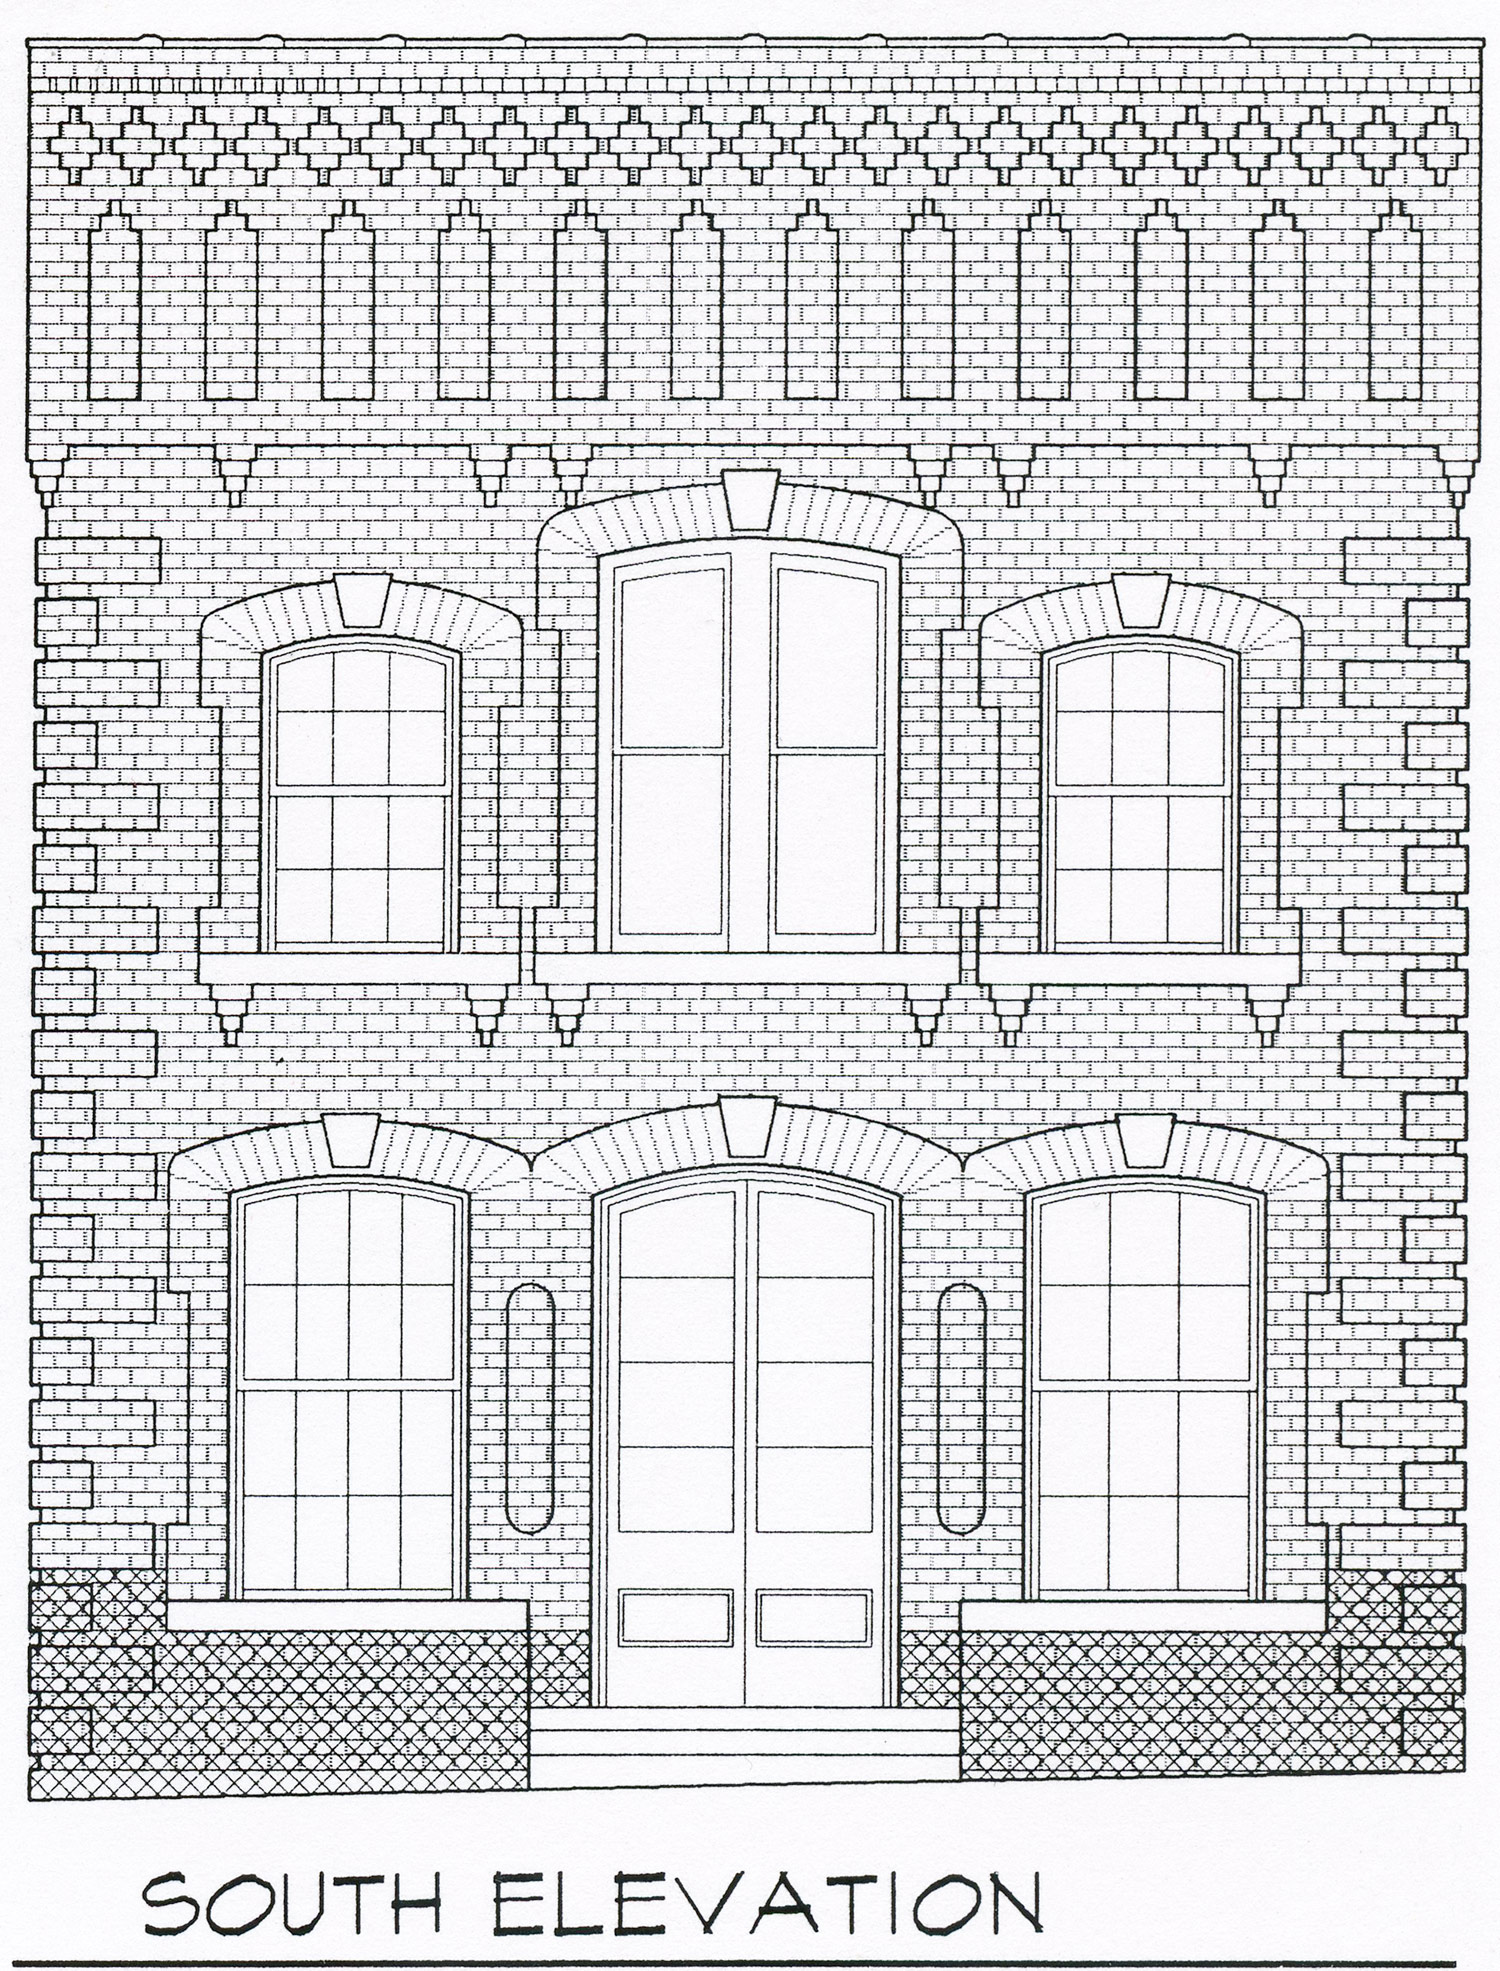 South Elevation, Summerfield Town Hall Plans